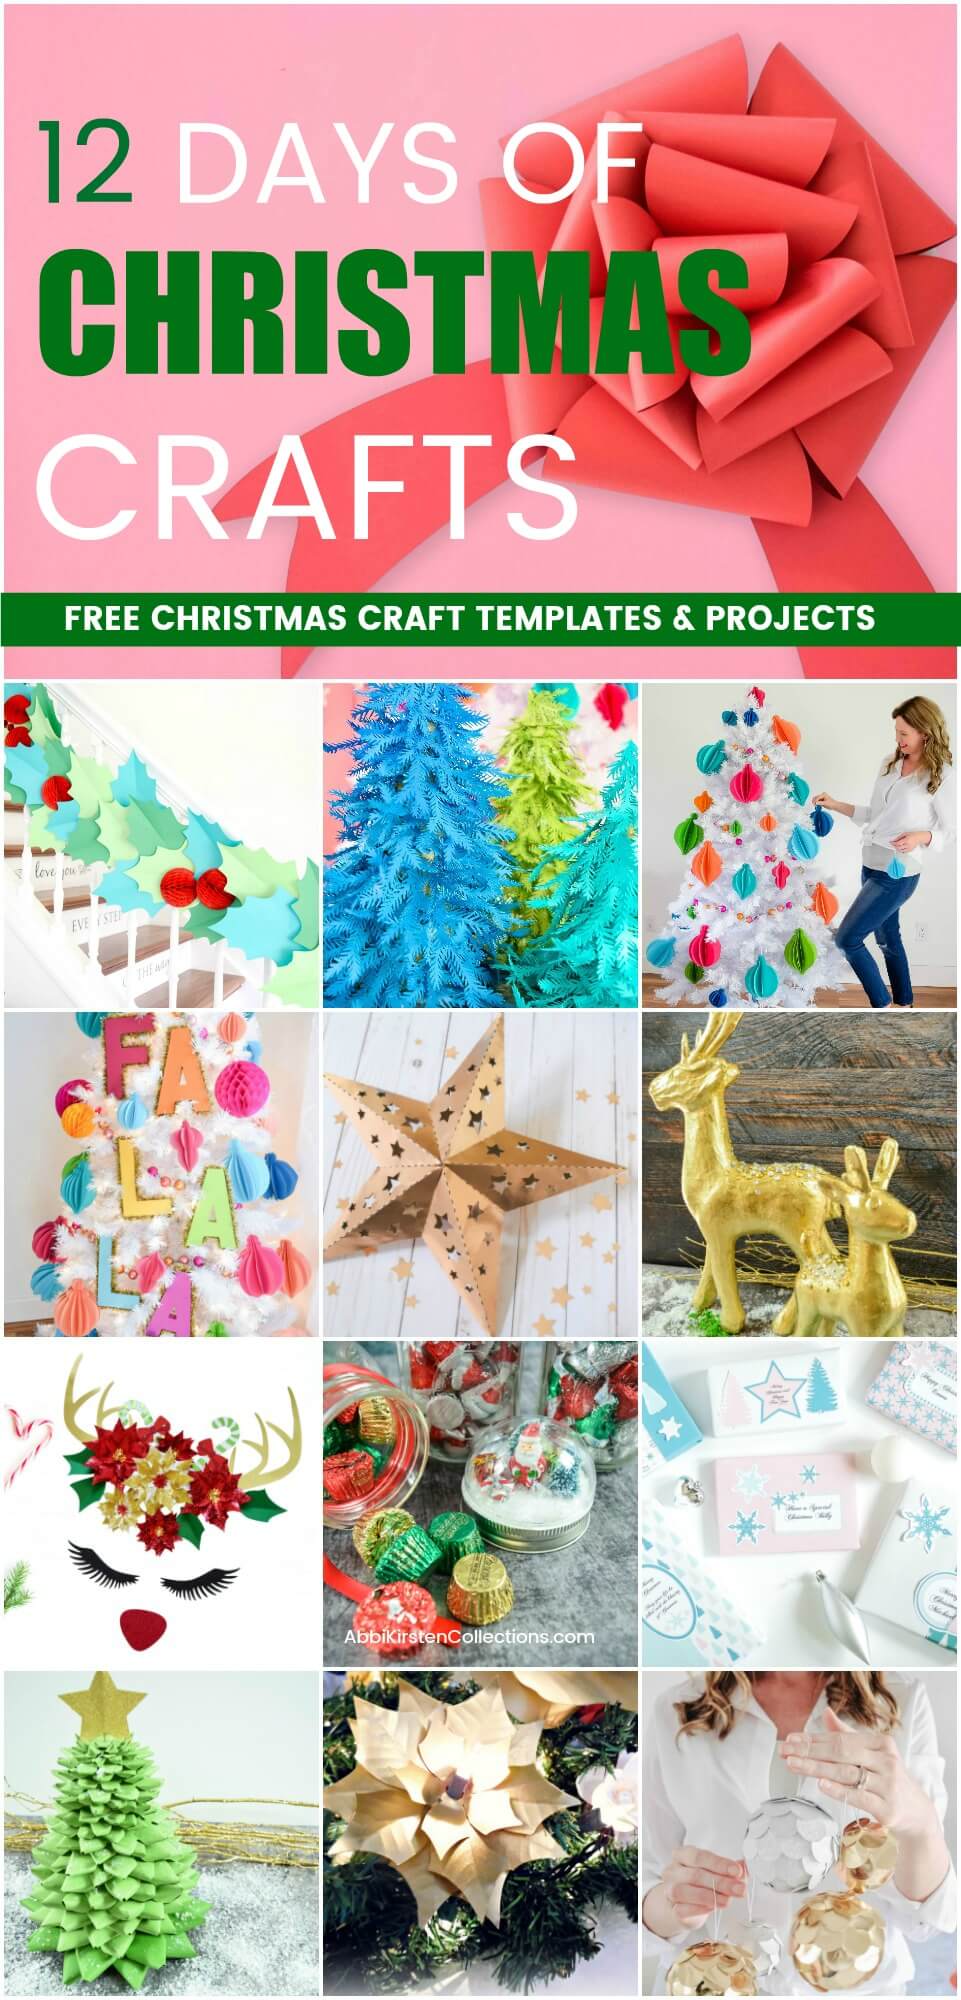 A collage of 12 Christmas craft images, including paper garlands, Christmas tree decorations, gift wrap, and more. Text across the image says "12 Days of Christmas Crafts" and "Free Christmas craft templates & projects"